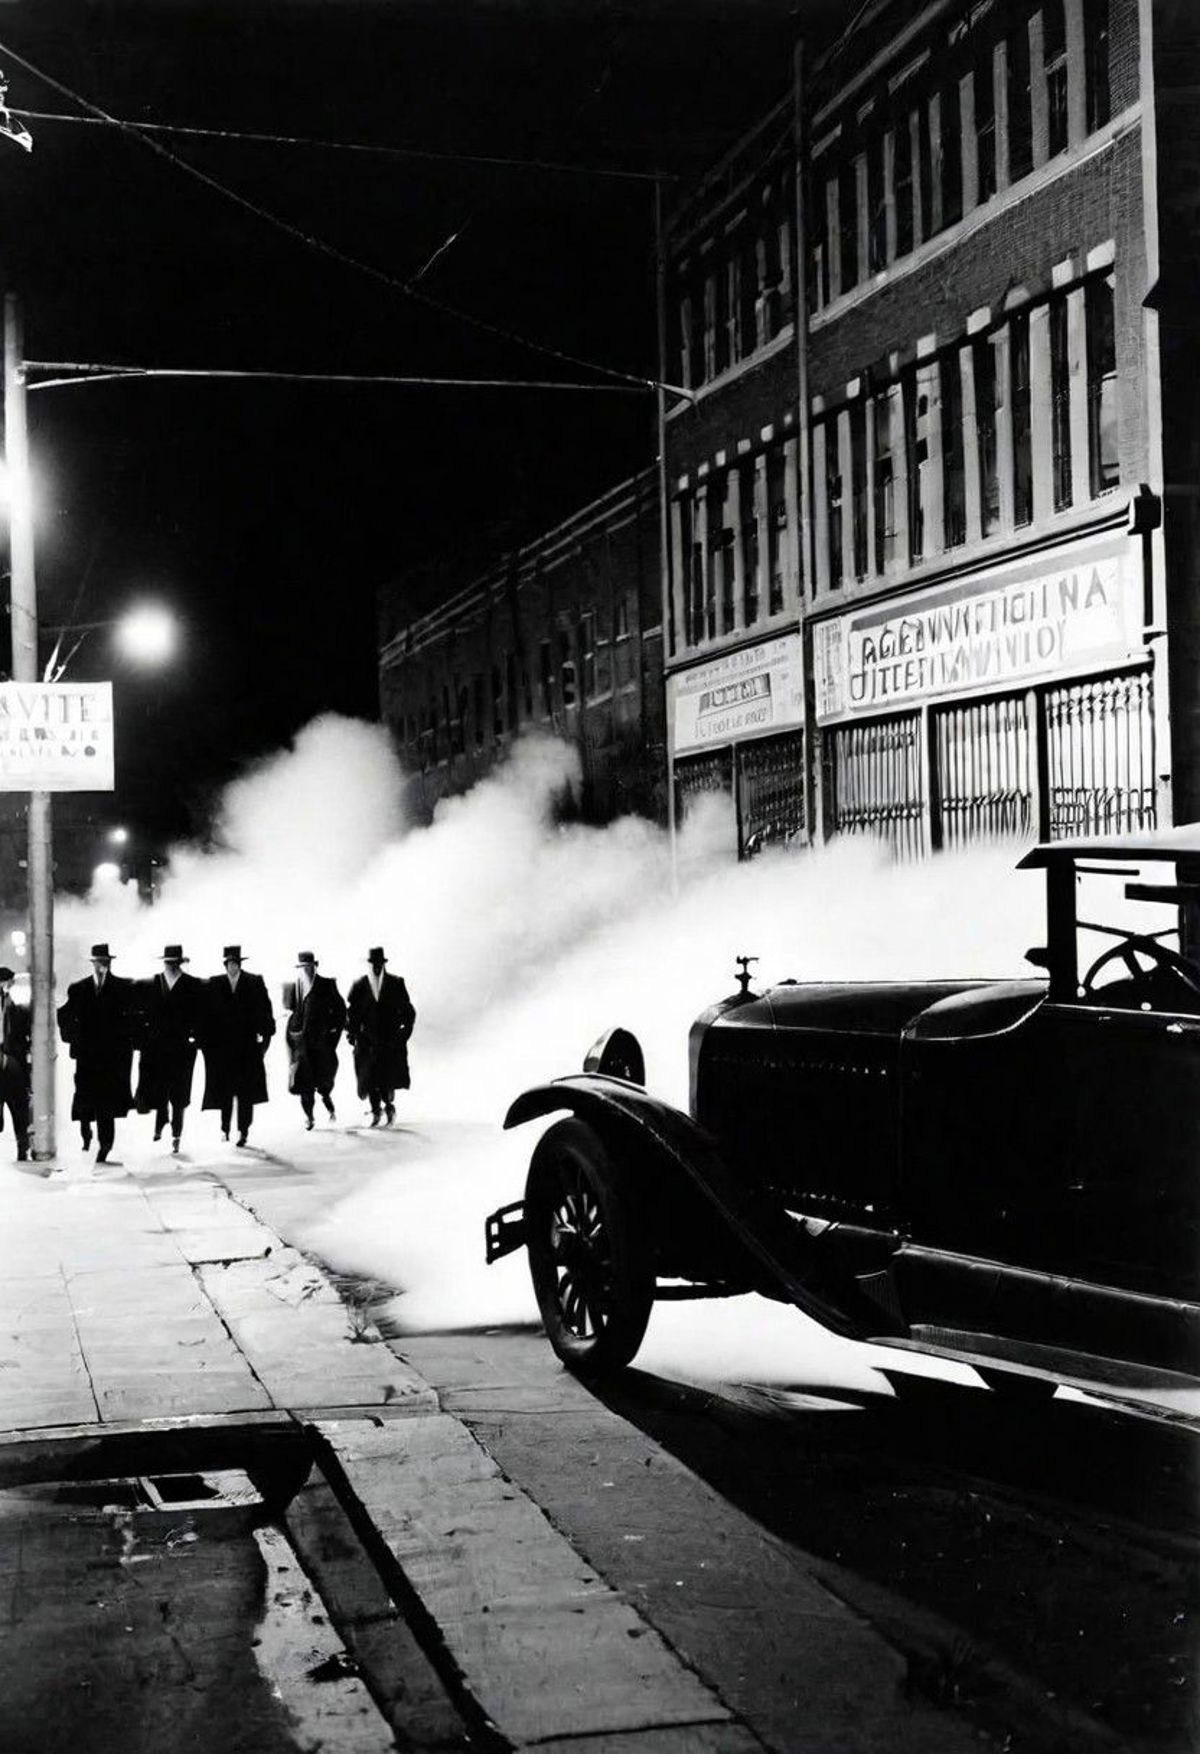 A group of people walking past a car at night with smoke billowing in the background.